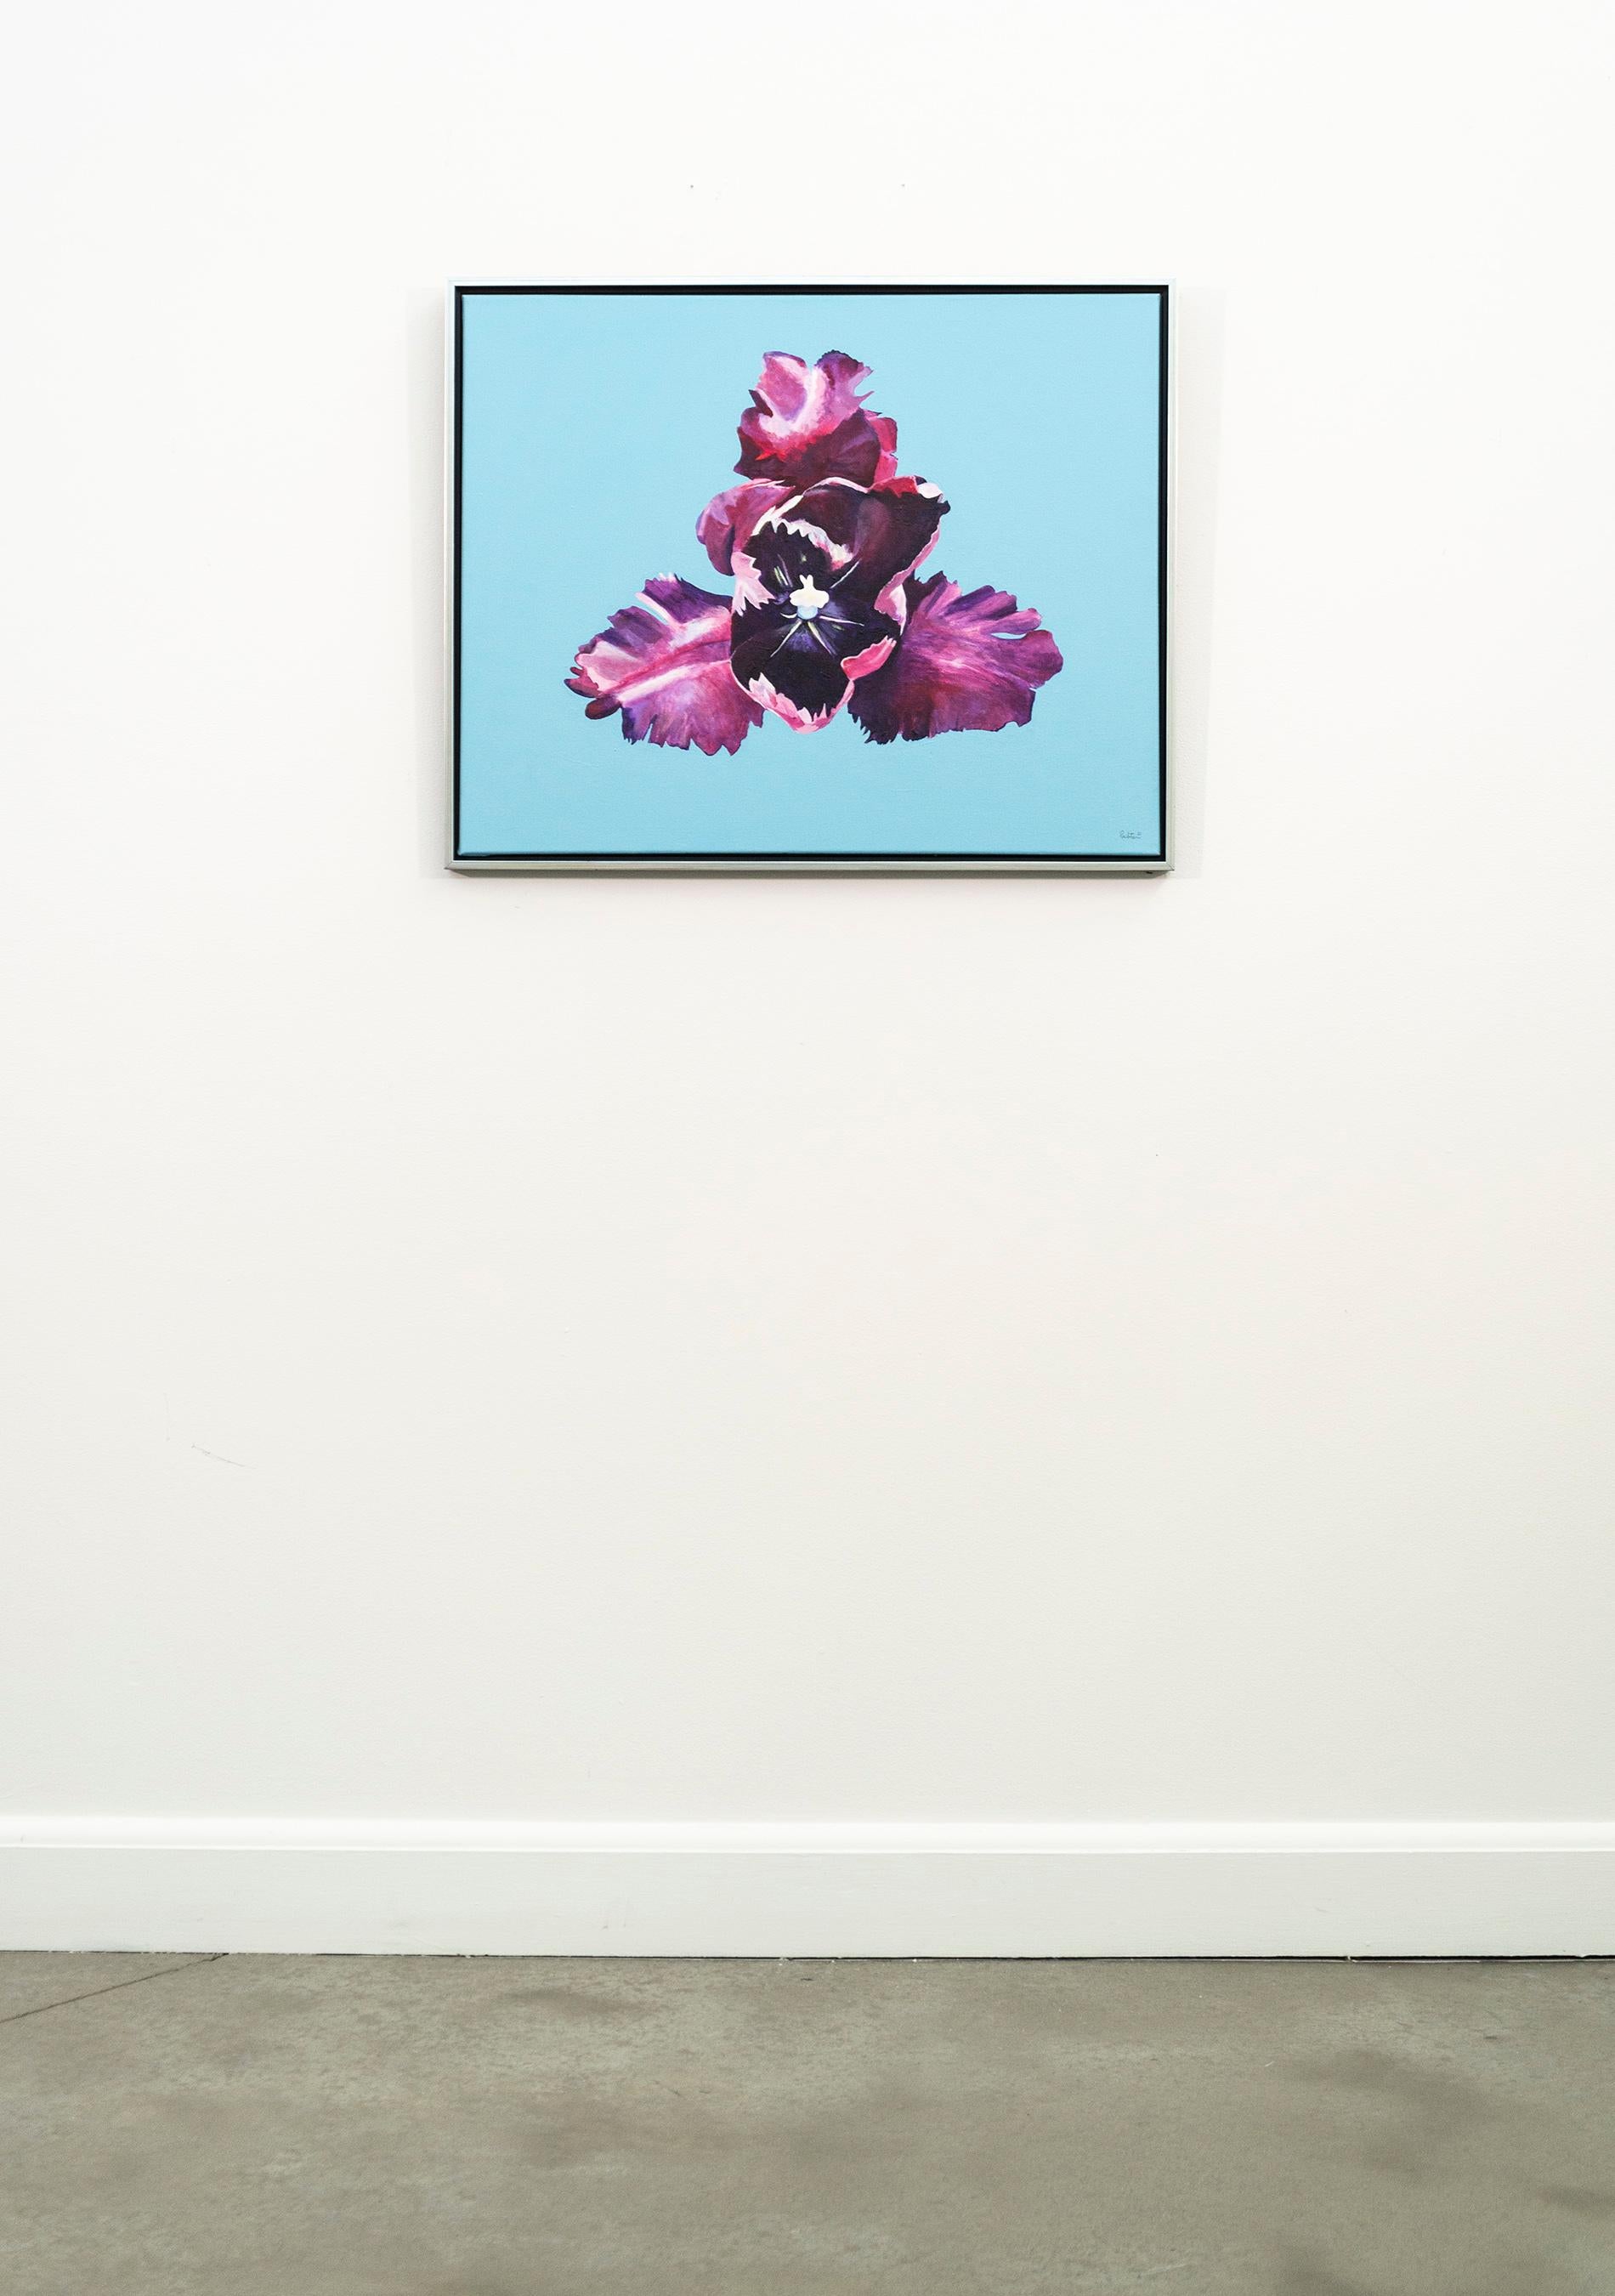 Canadian artist Charles Pachter has long been cherished for painting pop art images that are patriotic and lift the spirits. This bold rendition of an iris is one of a new series of pieces illustrating flowers created in 2021. The dark purple, pink,